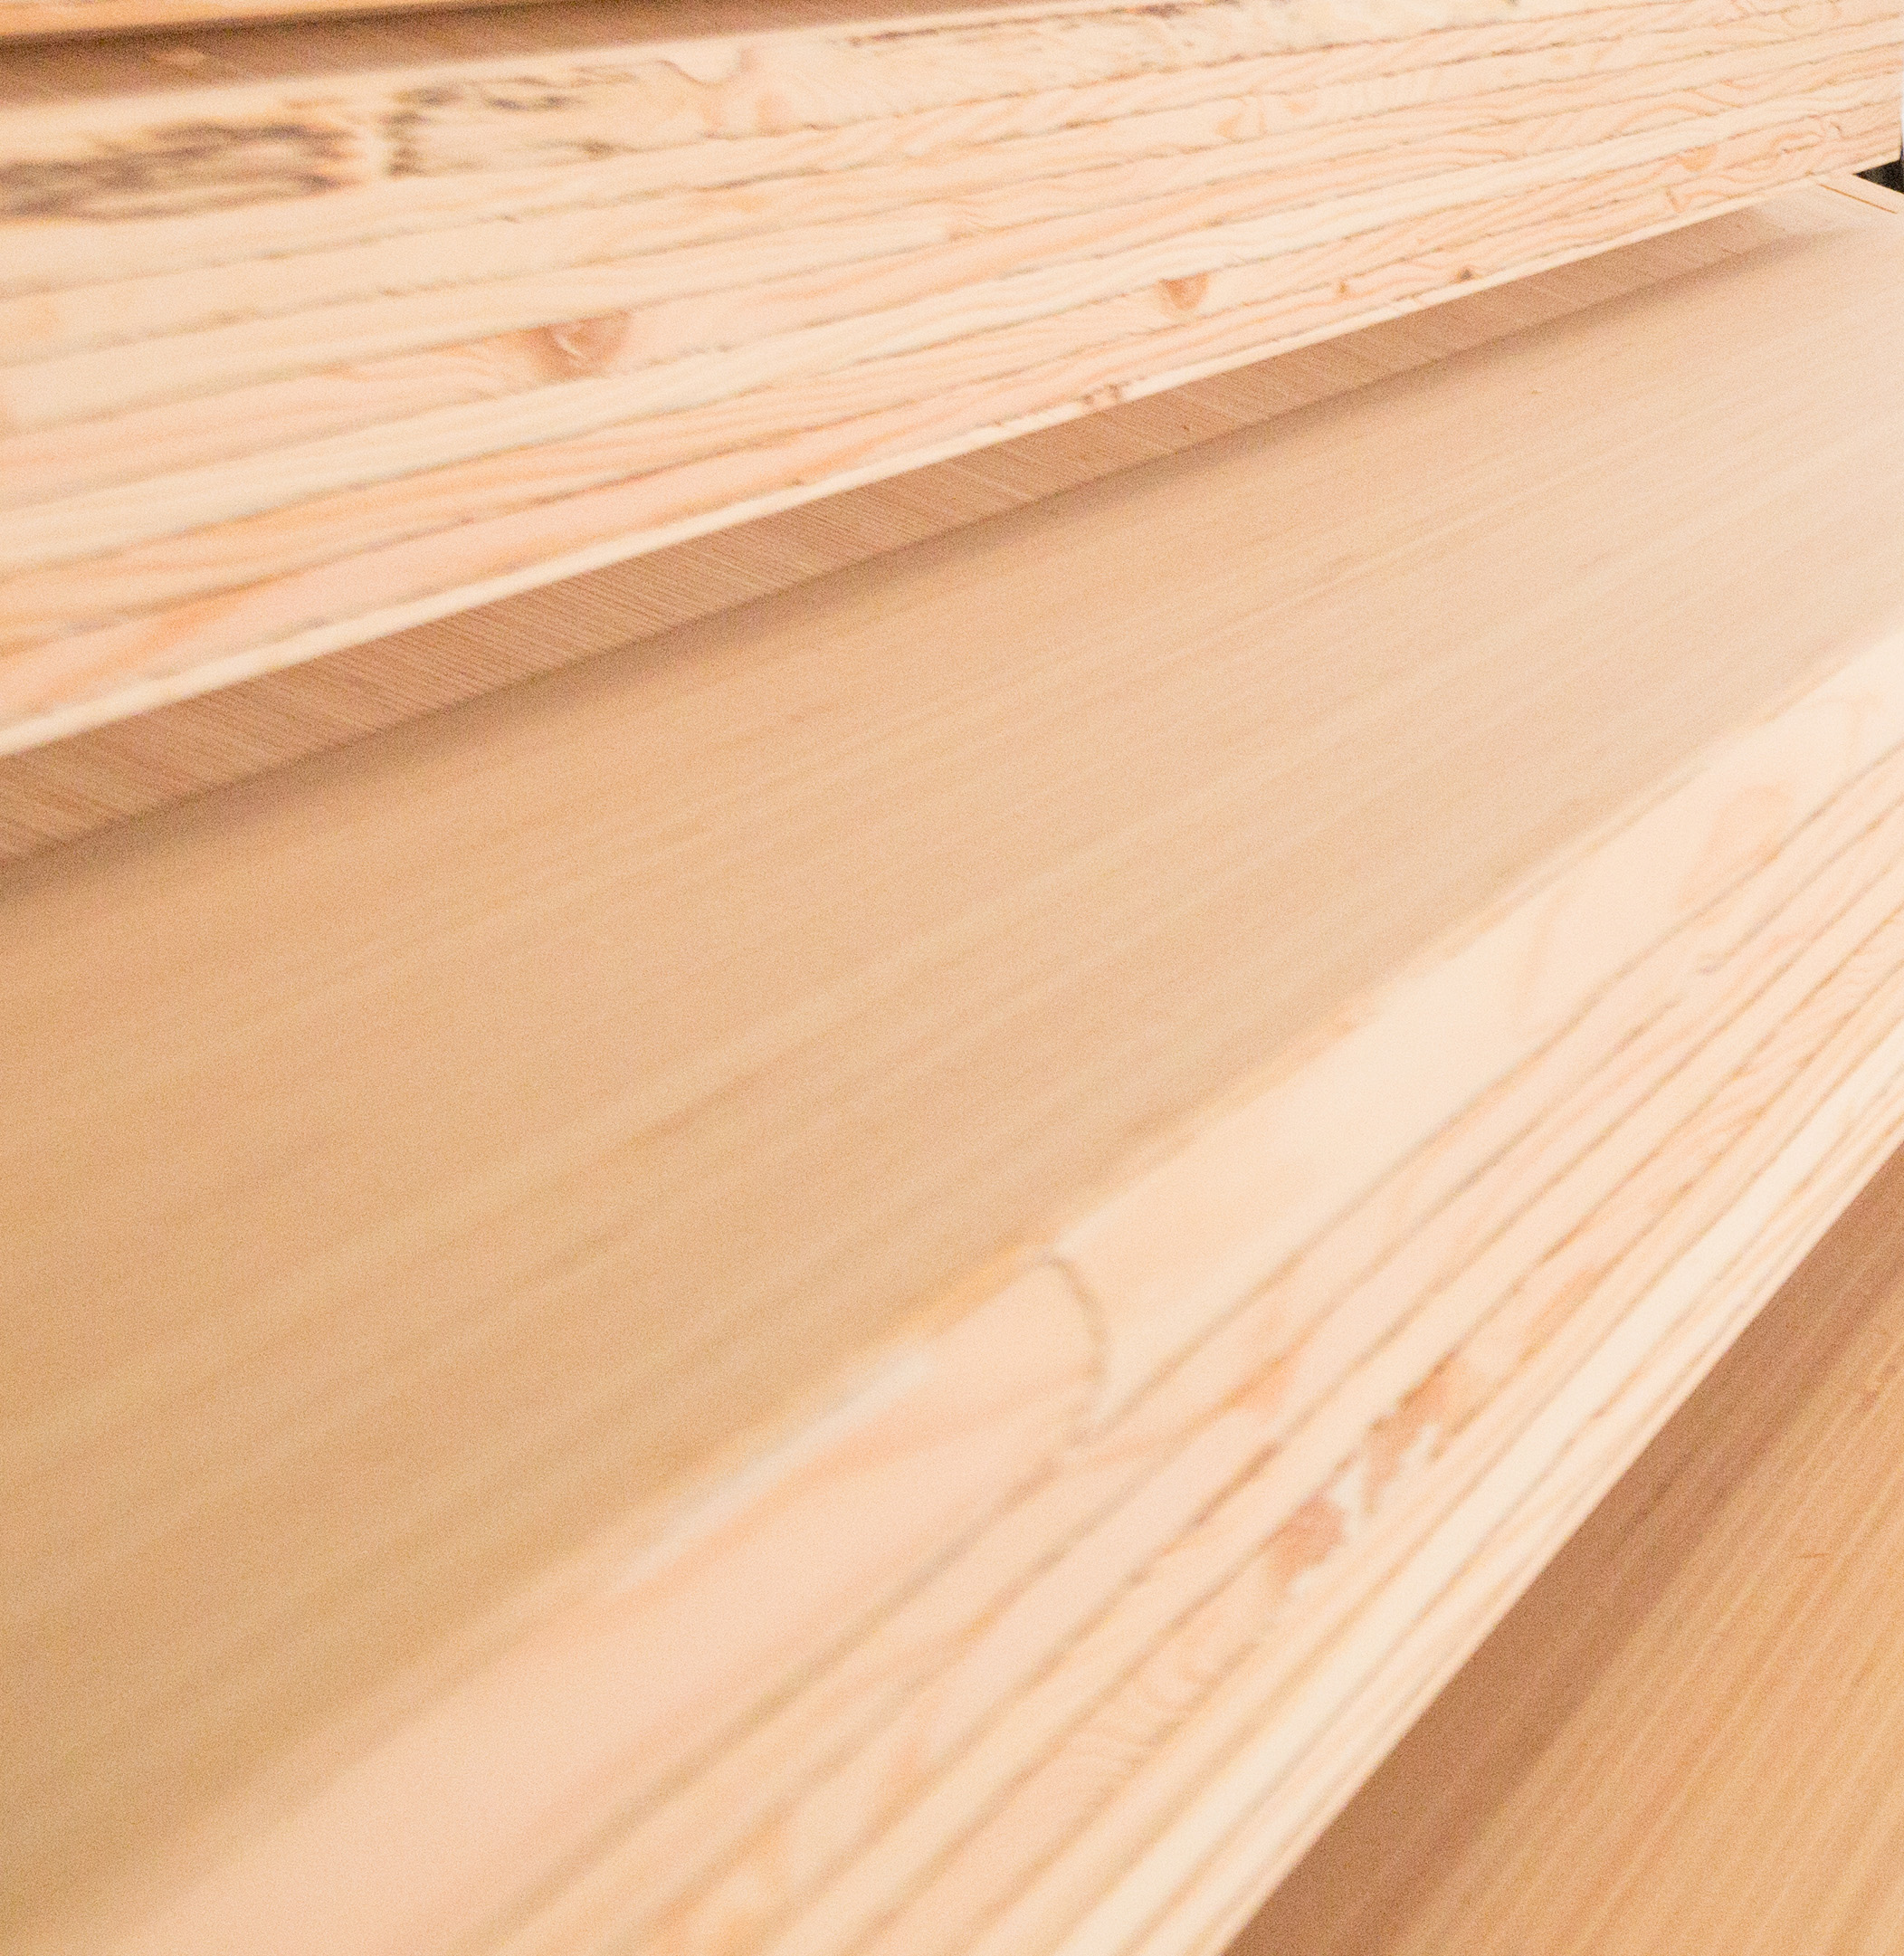 What Is Laminated Lumber (LVL)? | naturally:wood